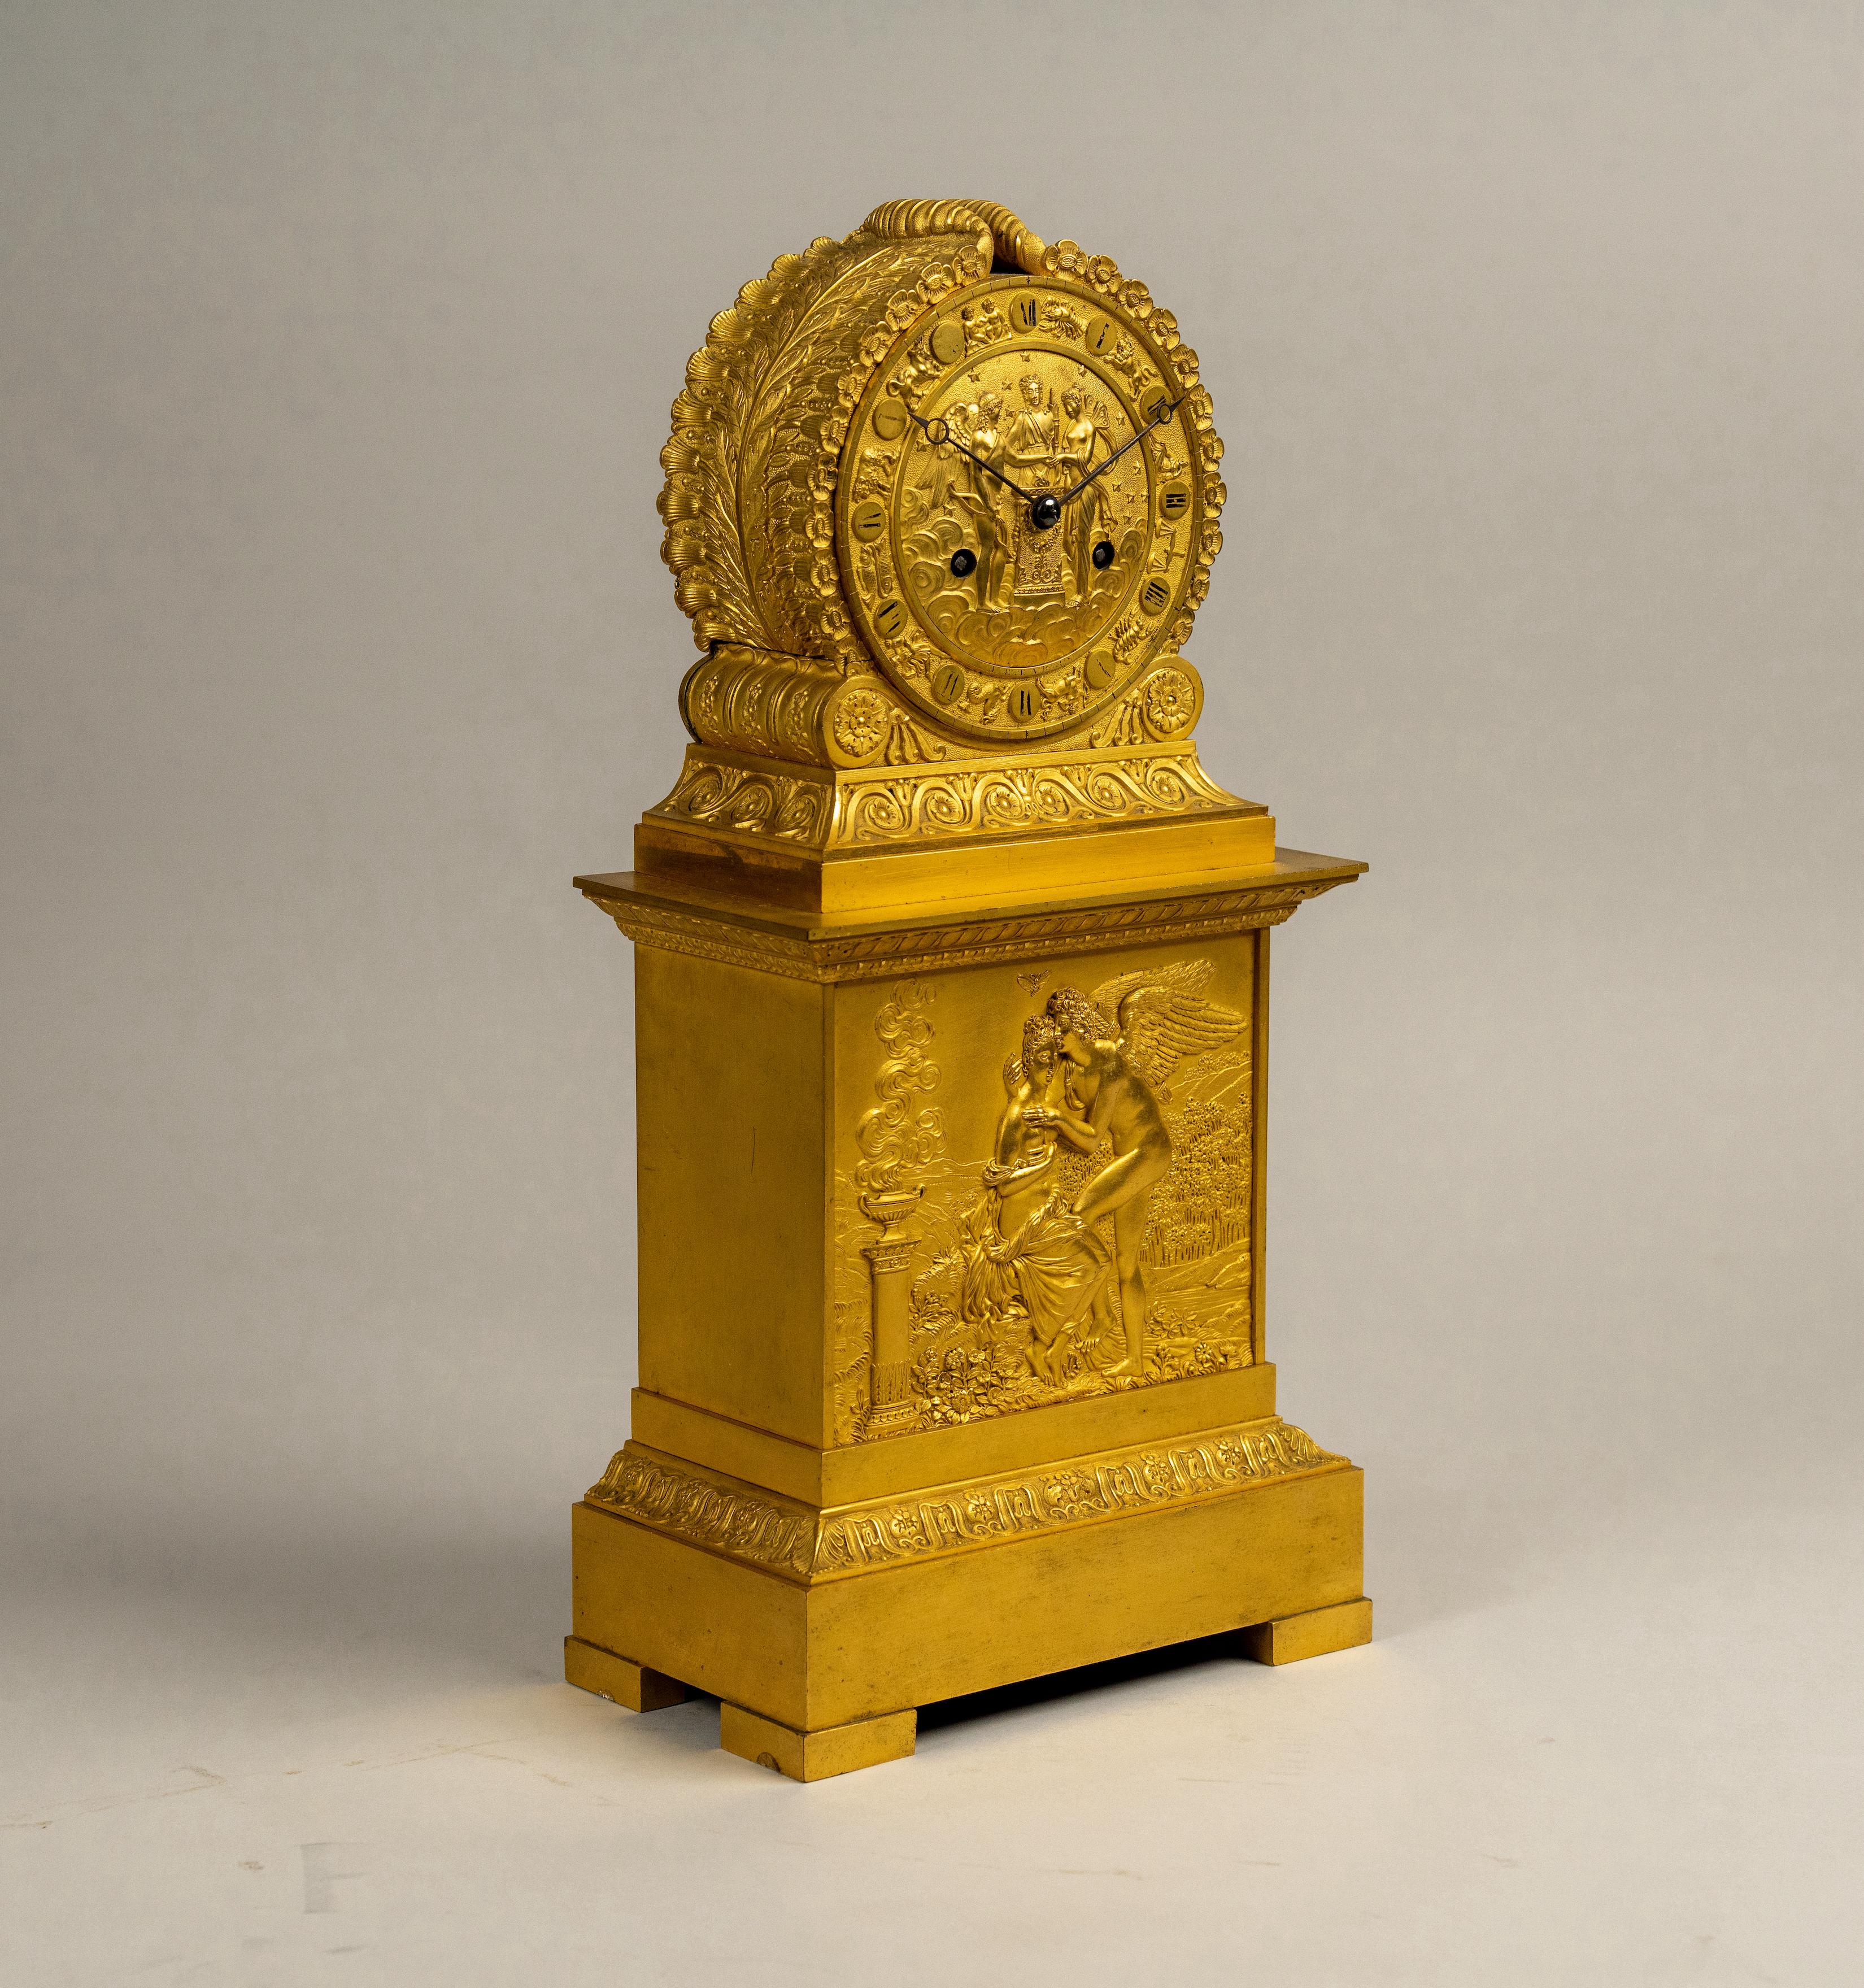 Exquisite early 19th century French Empire hand-chiseled ormolu mantel clock. Set on bracket feet and a rectangular base. Above, a superb inset plaque of Psyche and Cupid embracing close to a classical altar among flowers and butterflies. The